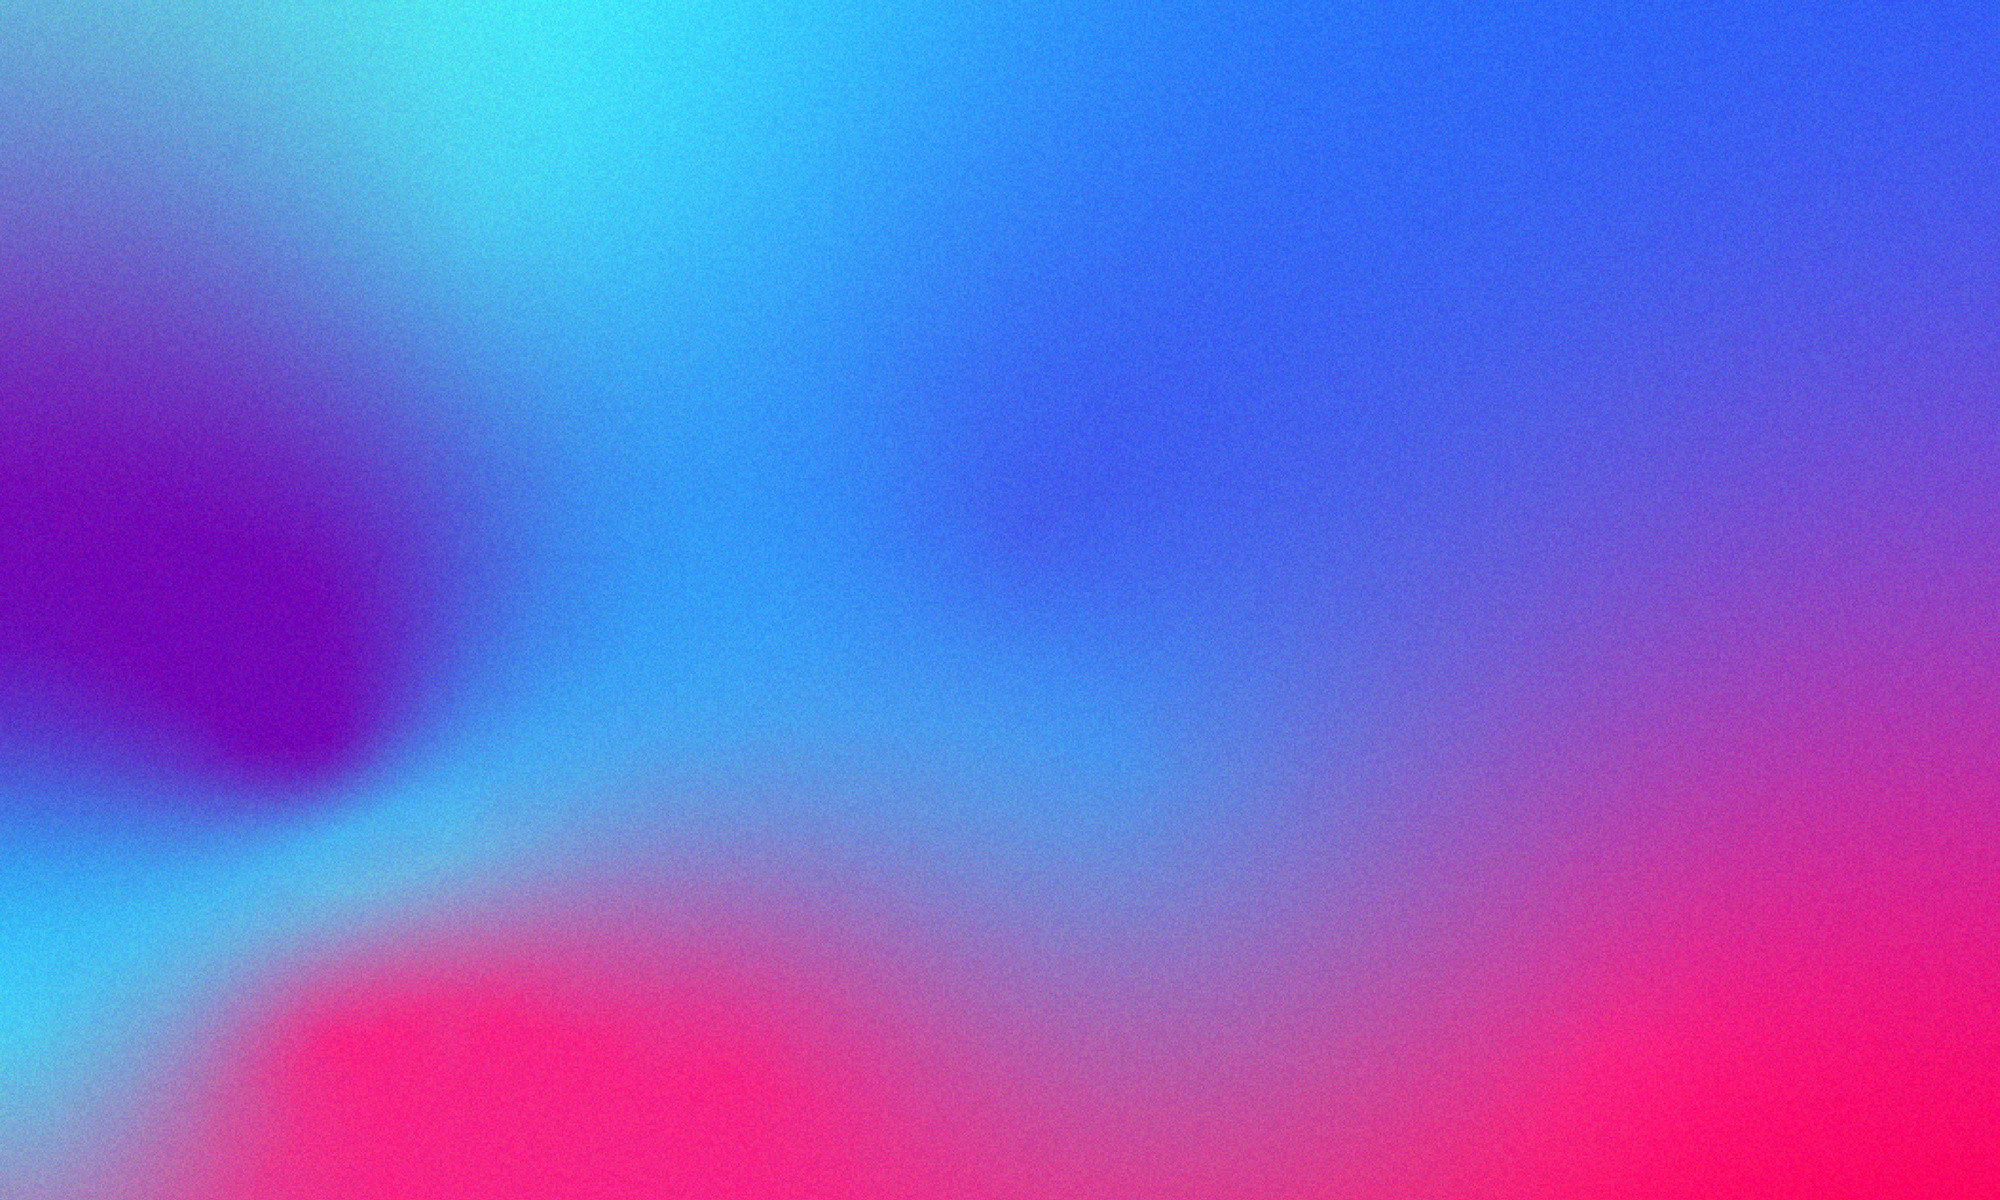 Bright pink and blue colorful abstract blurry background